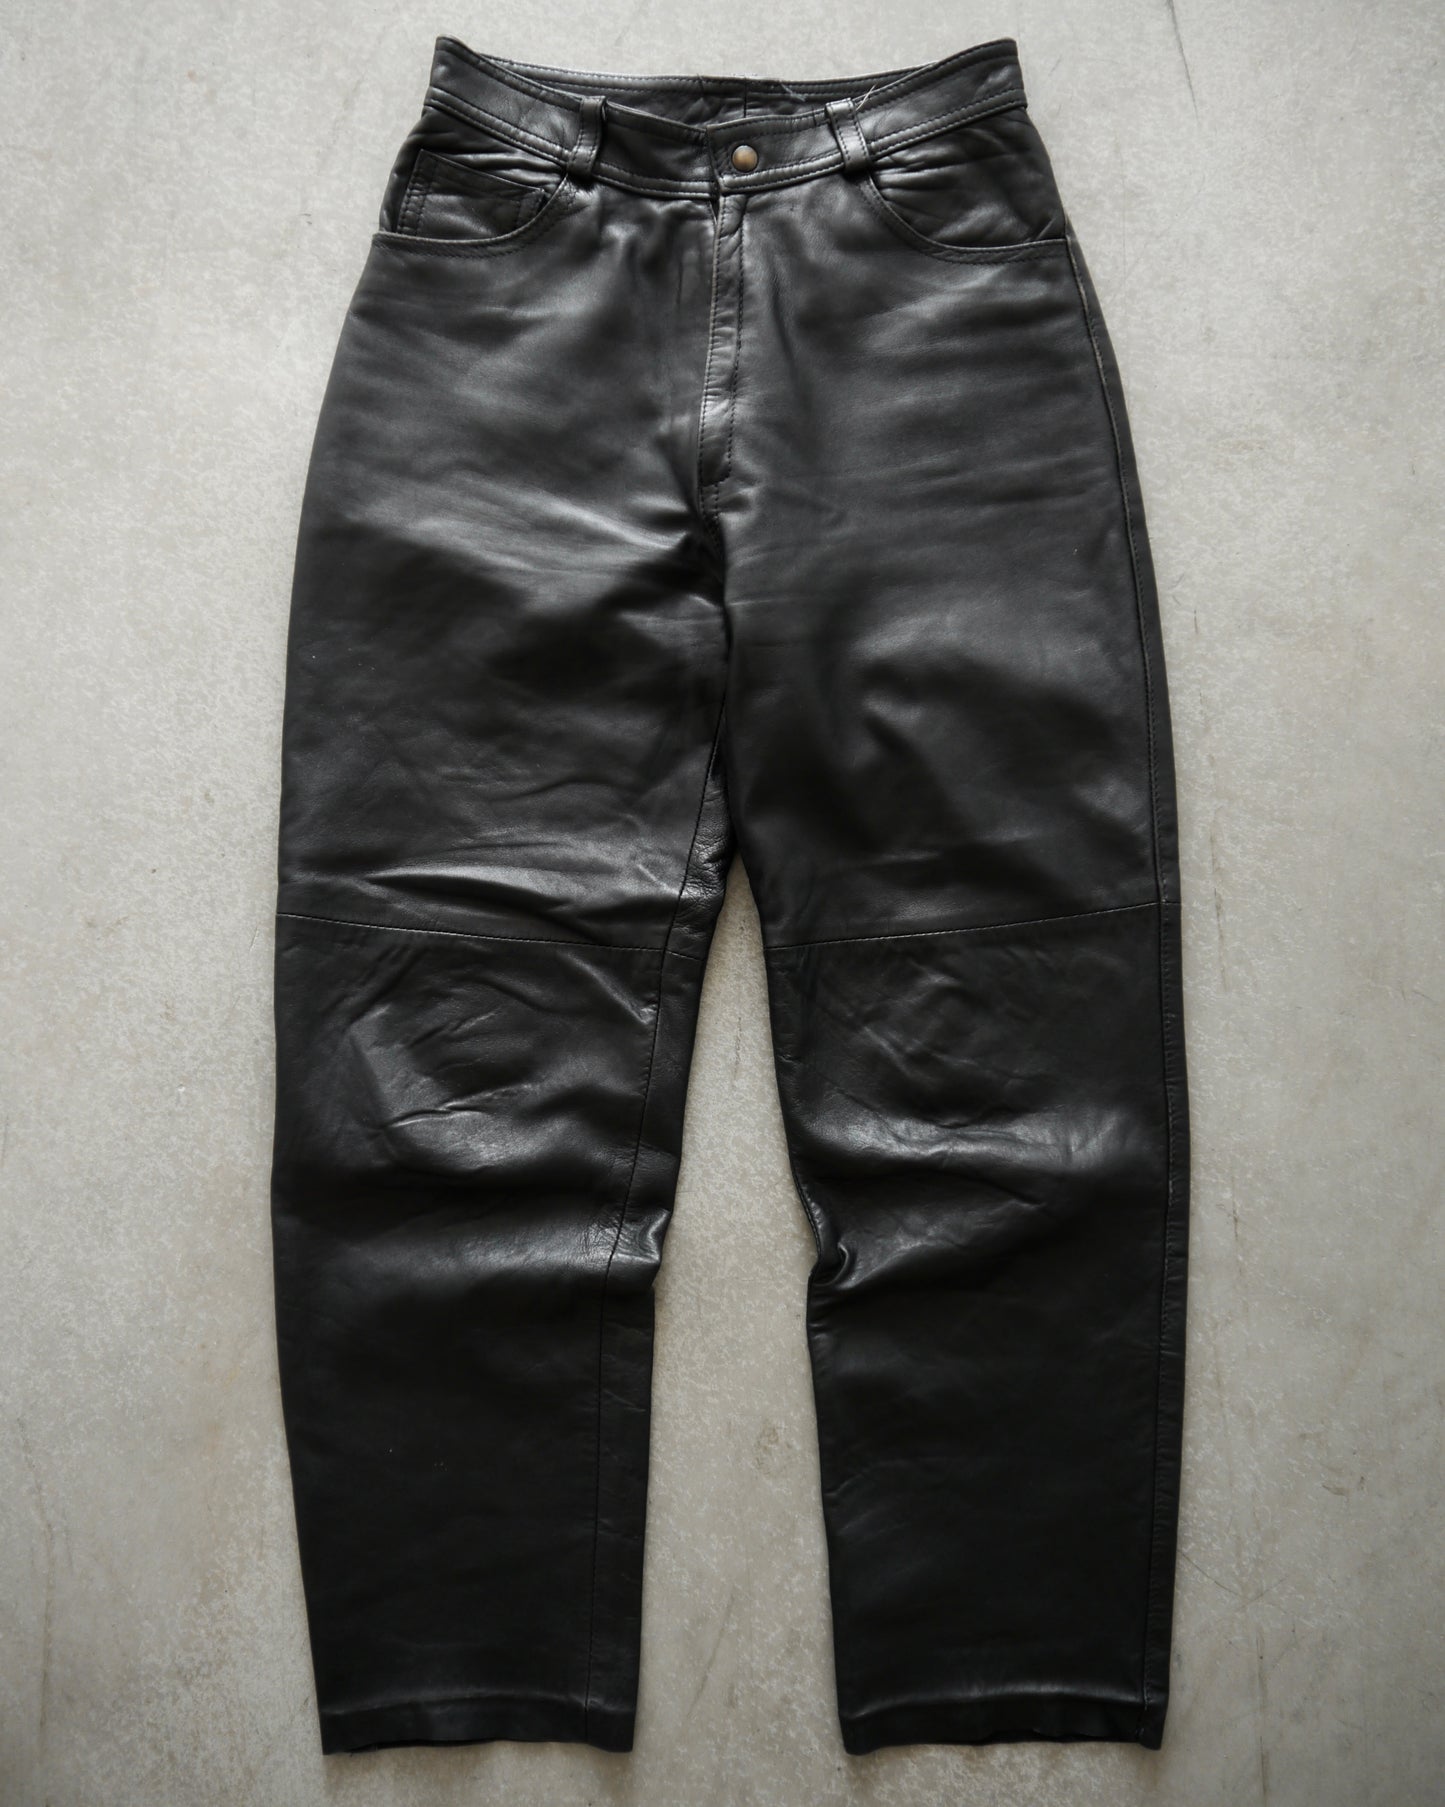 80s French Artisanal Black Leather Pants (29x29)